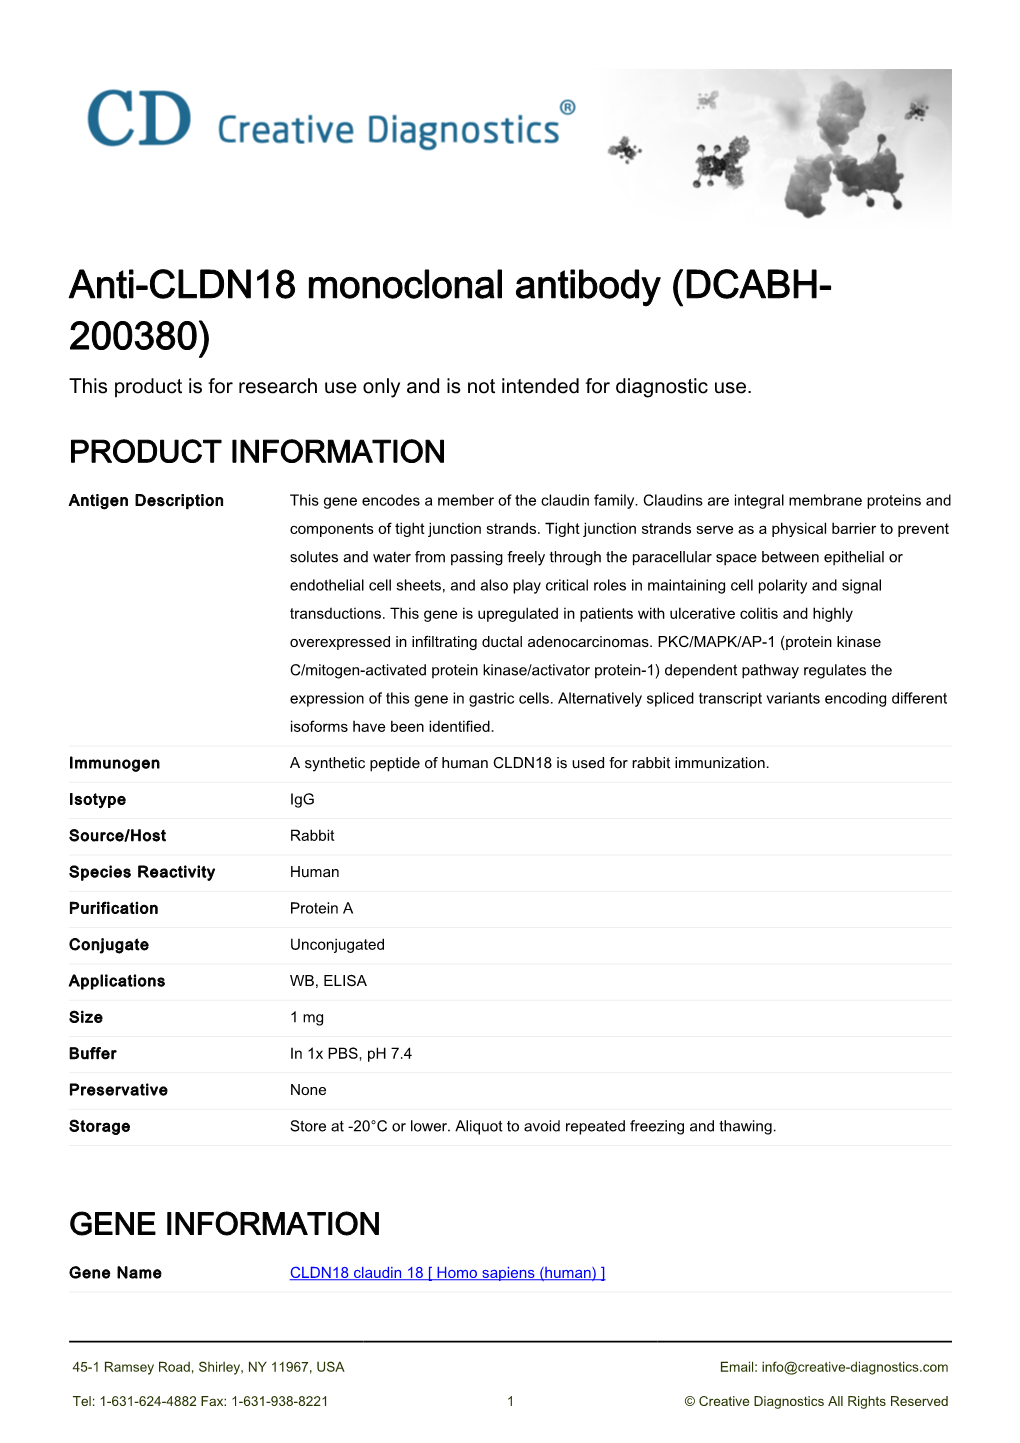 Anti-CLDN18 Monoclonal Antibody (DCABH- 200380) This Product Is for Research Use Only and Is Not Intended for Diagnostic Use